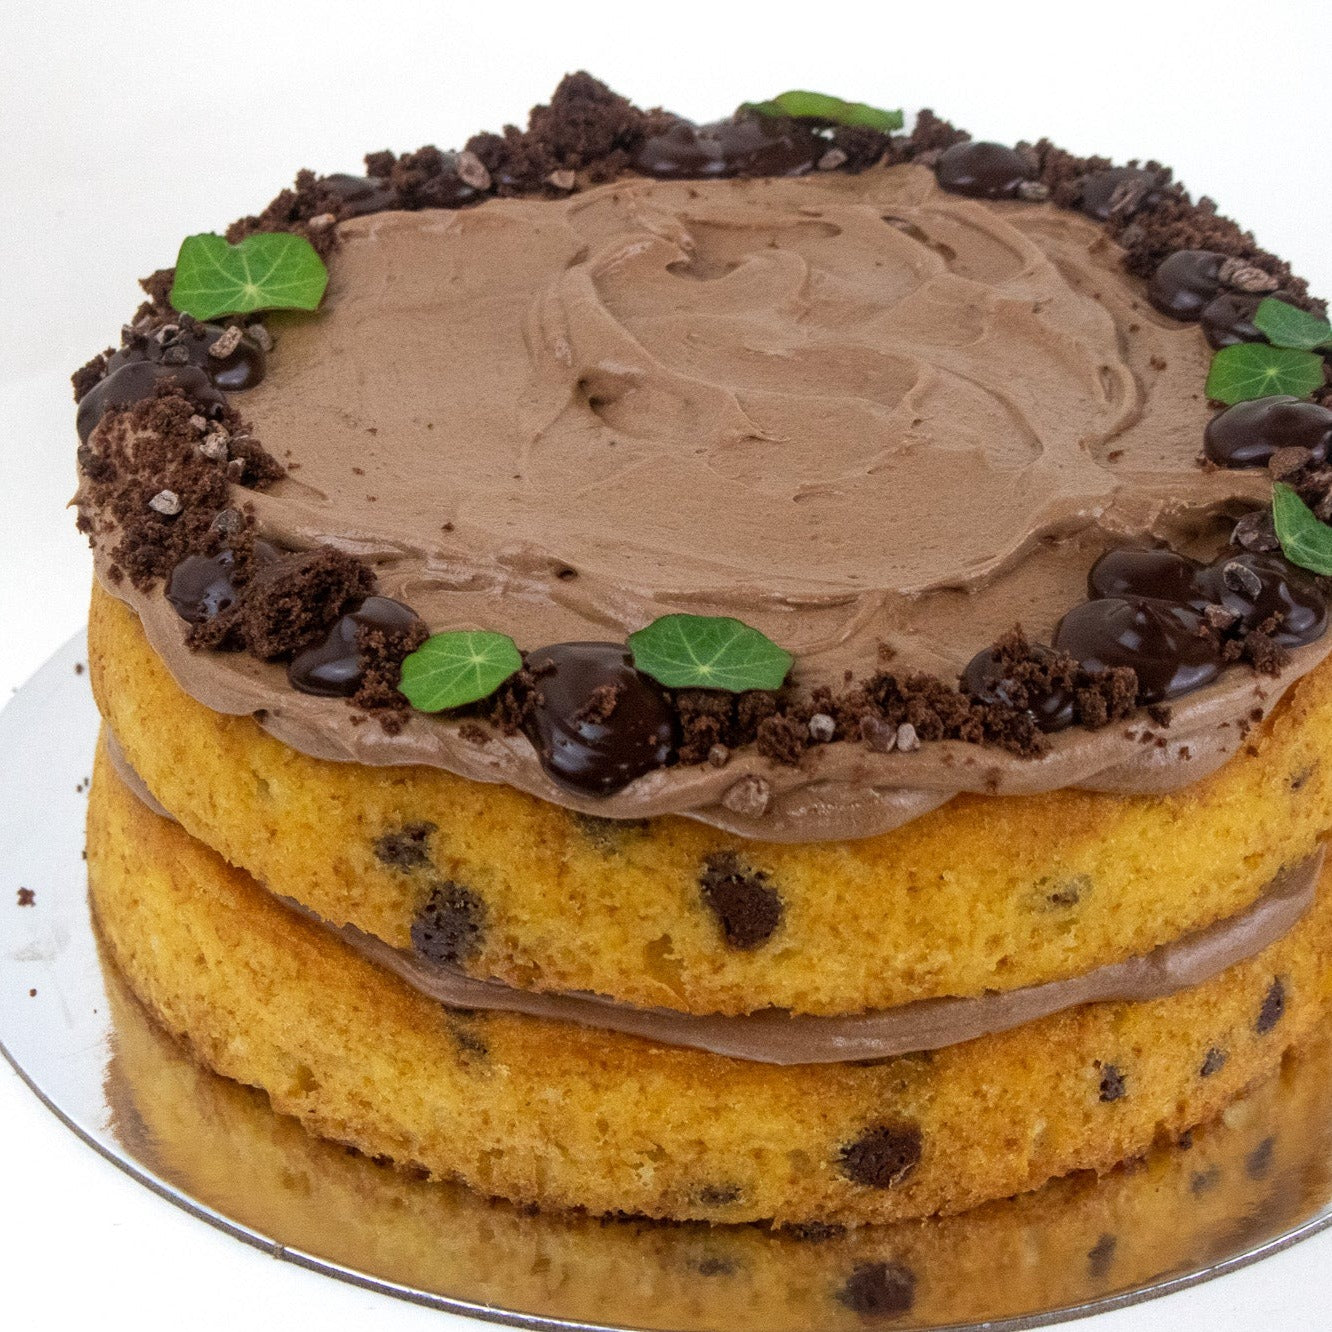 image of the top of the chocolate chip cake, showing the icing on top